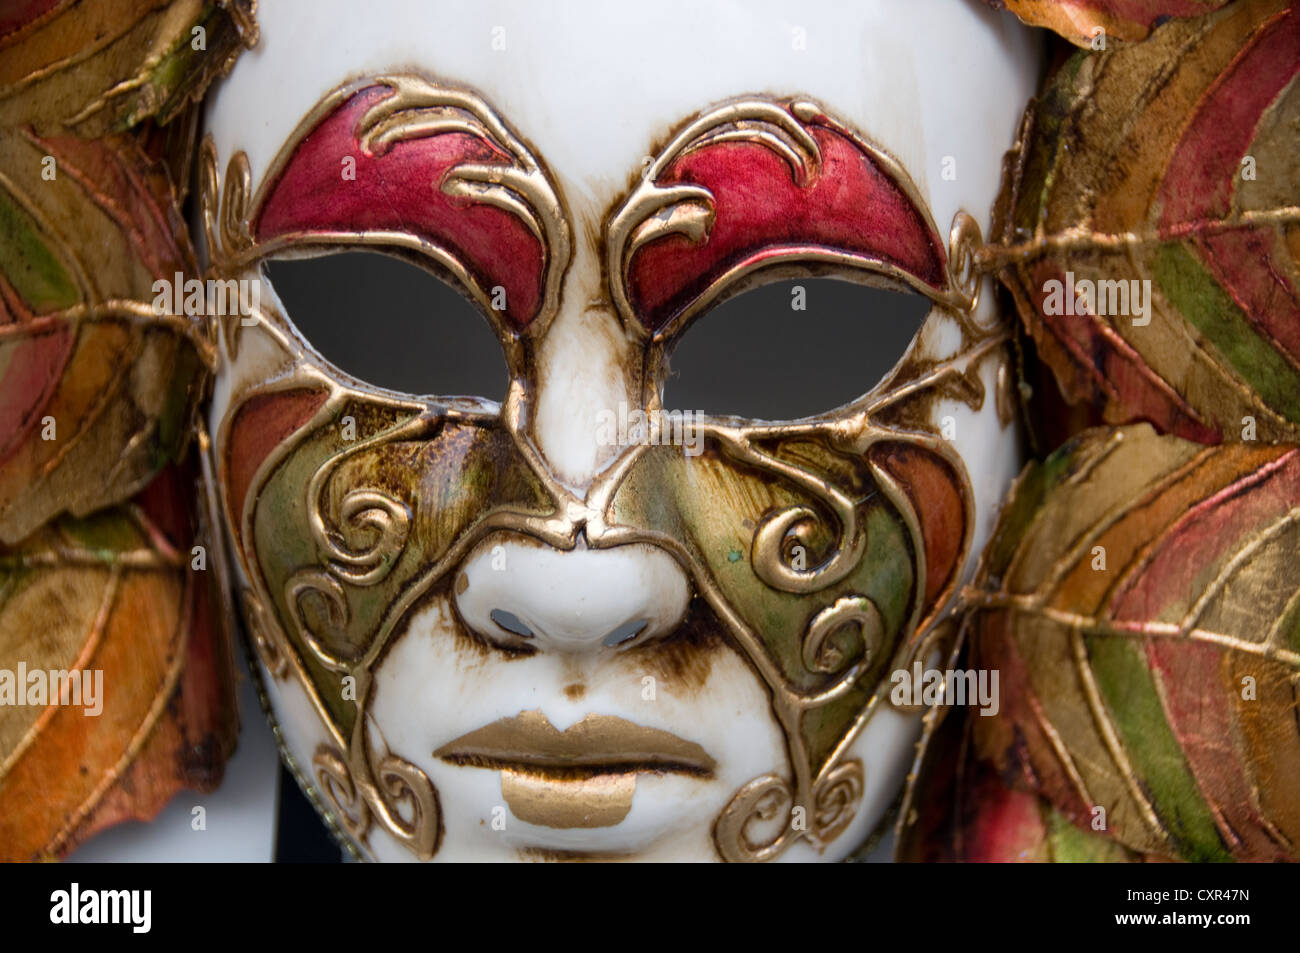 A display of Masquerade Ball Masks and Venetian Masks on sale in the town of Bardolino, a resort/fishing port in the red wine-growing region on the ea Stock Photo